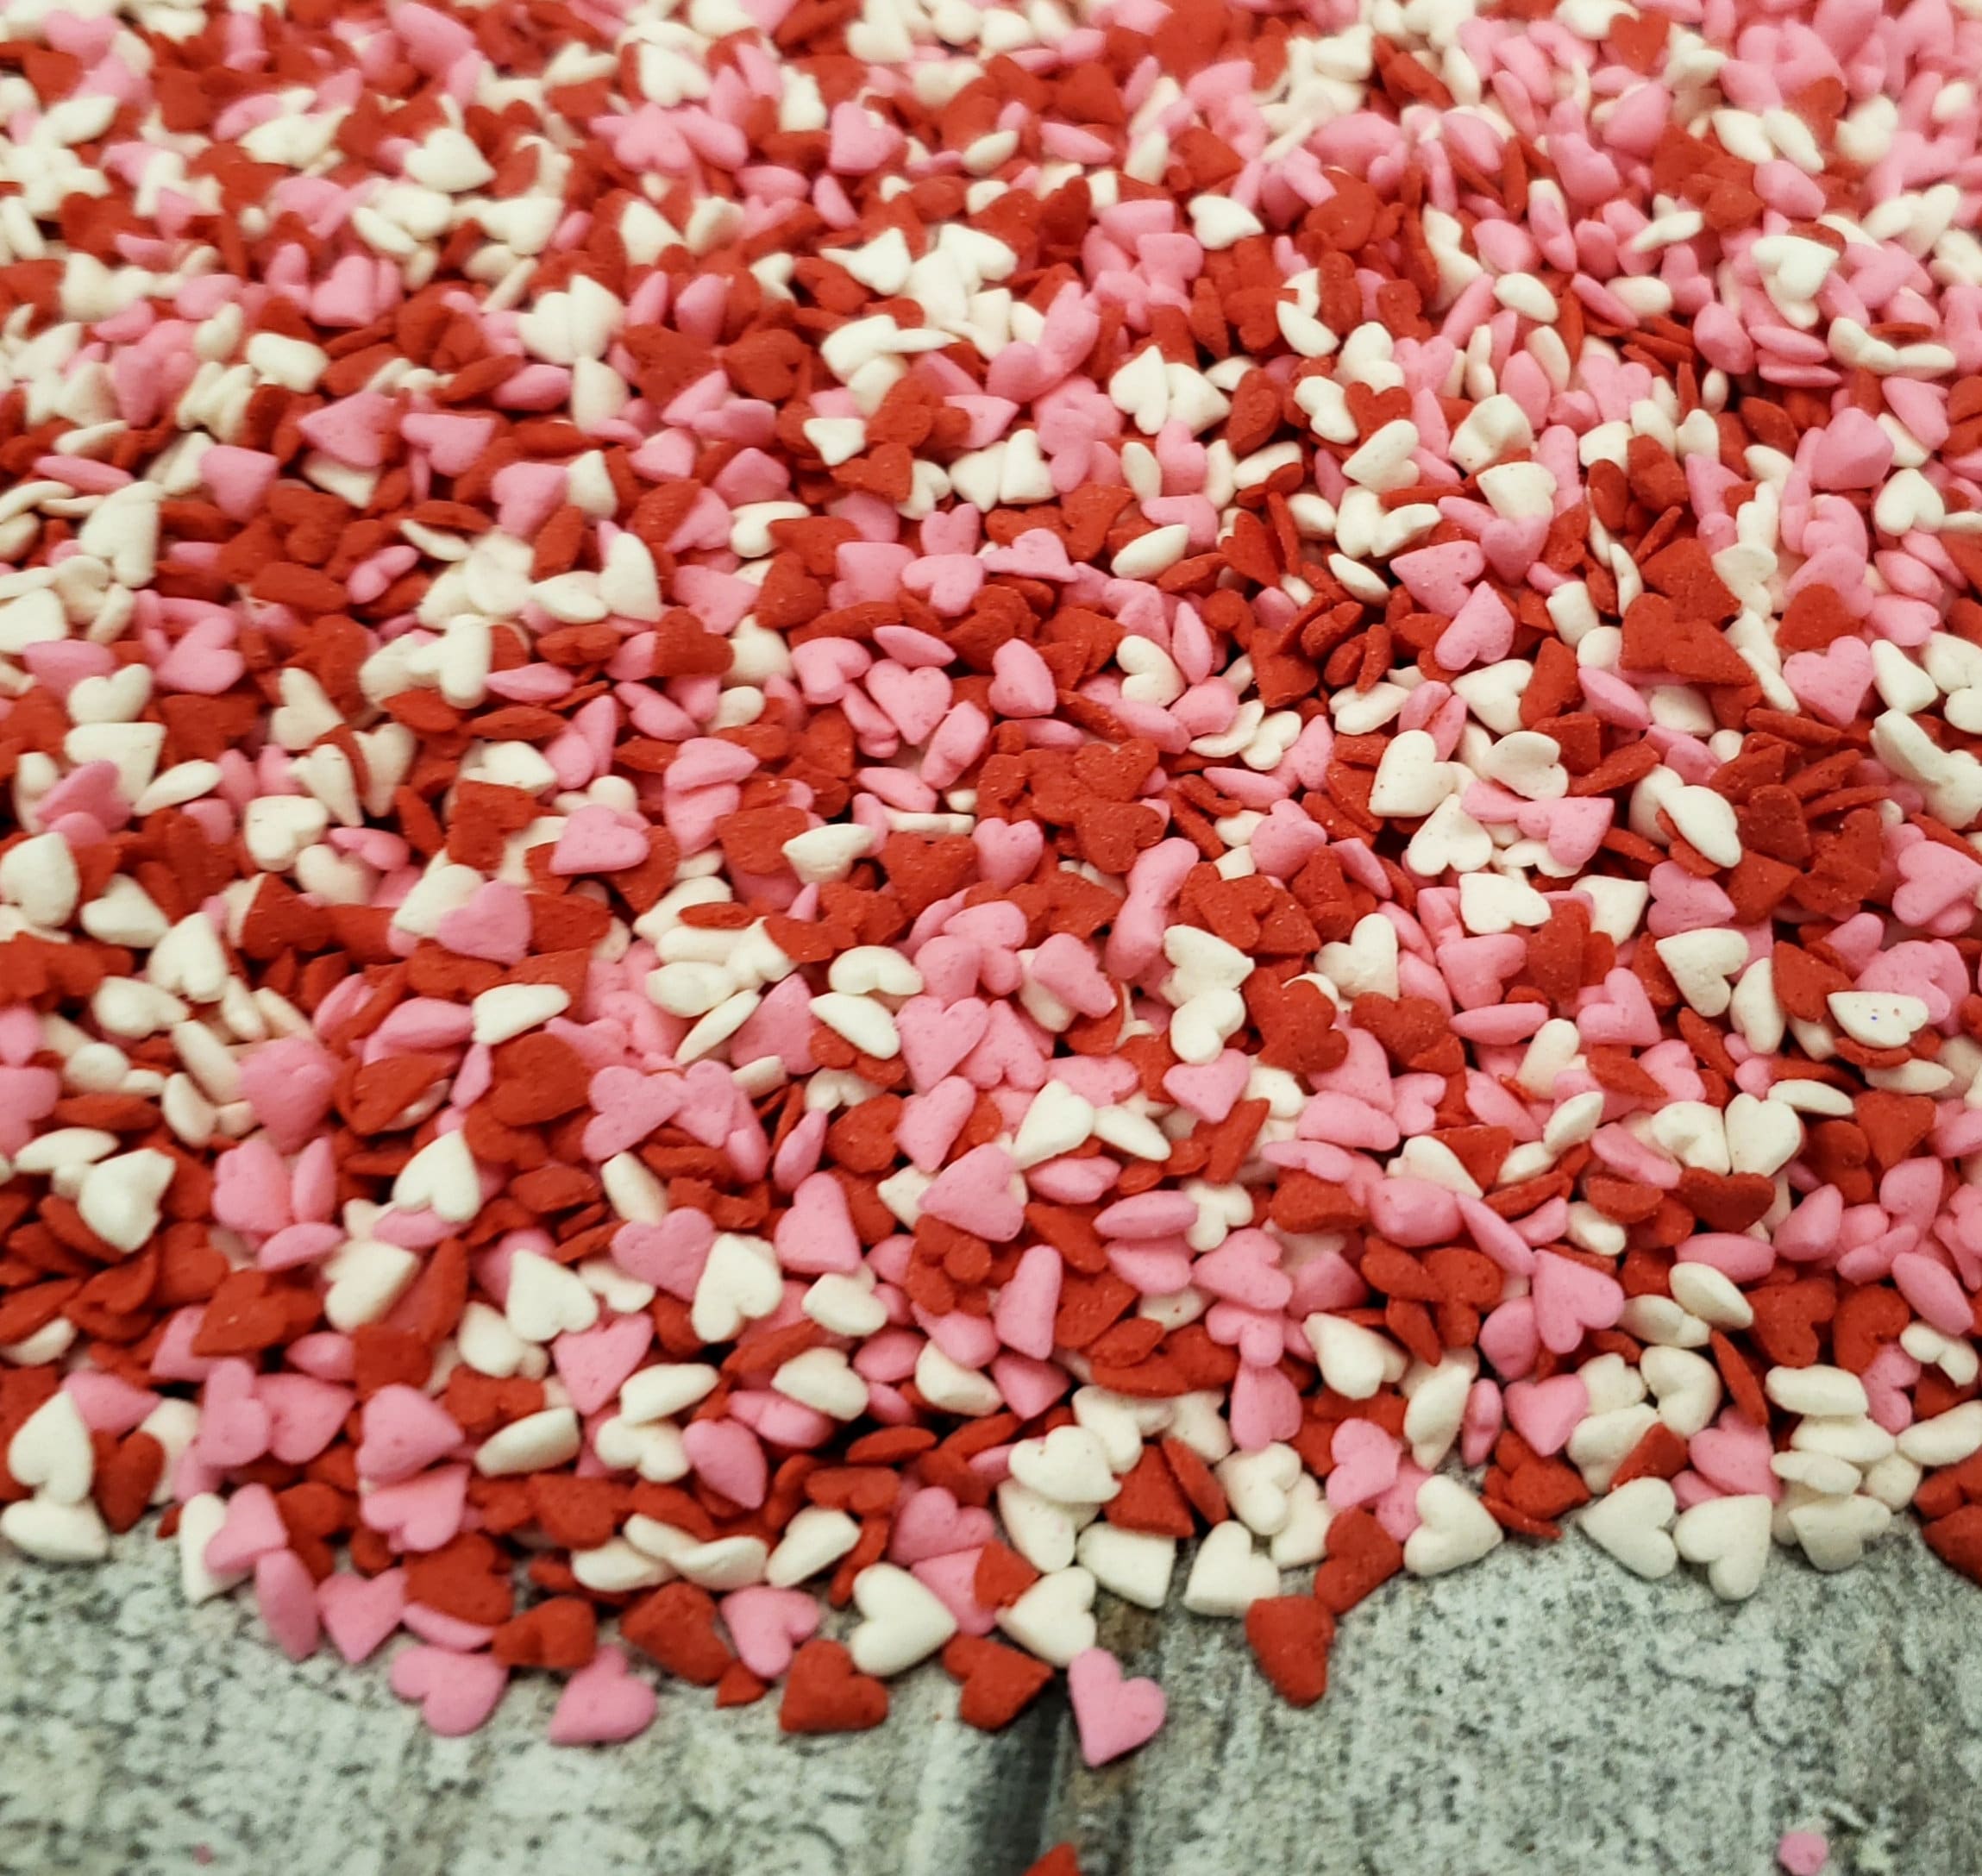 UPick The Amount Mini Red White and Pink Heart Confetti Edible Party Sprinkles 